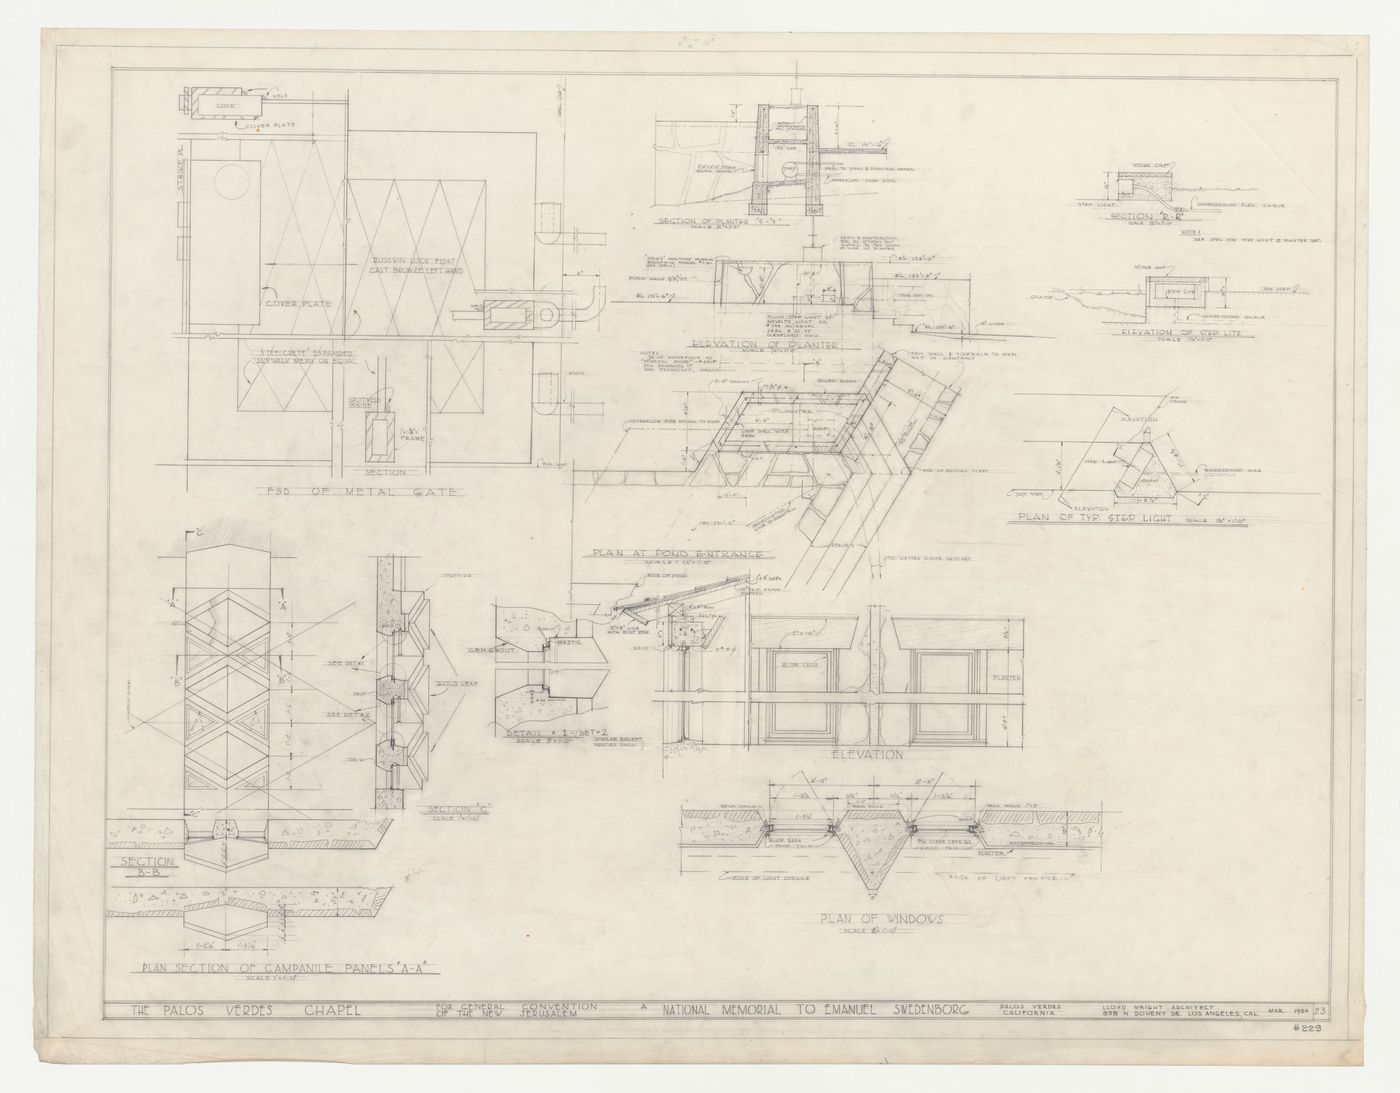 Wayfarers' Chapel, Palos Verdes, California: Plans, elevations and sections for vestry and campanile details, including campanile panels, windows, step light, metal gate and planter at pond entrance